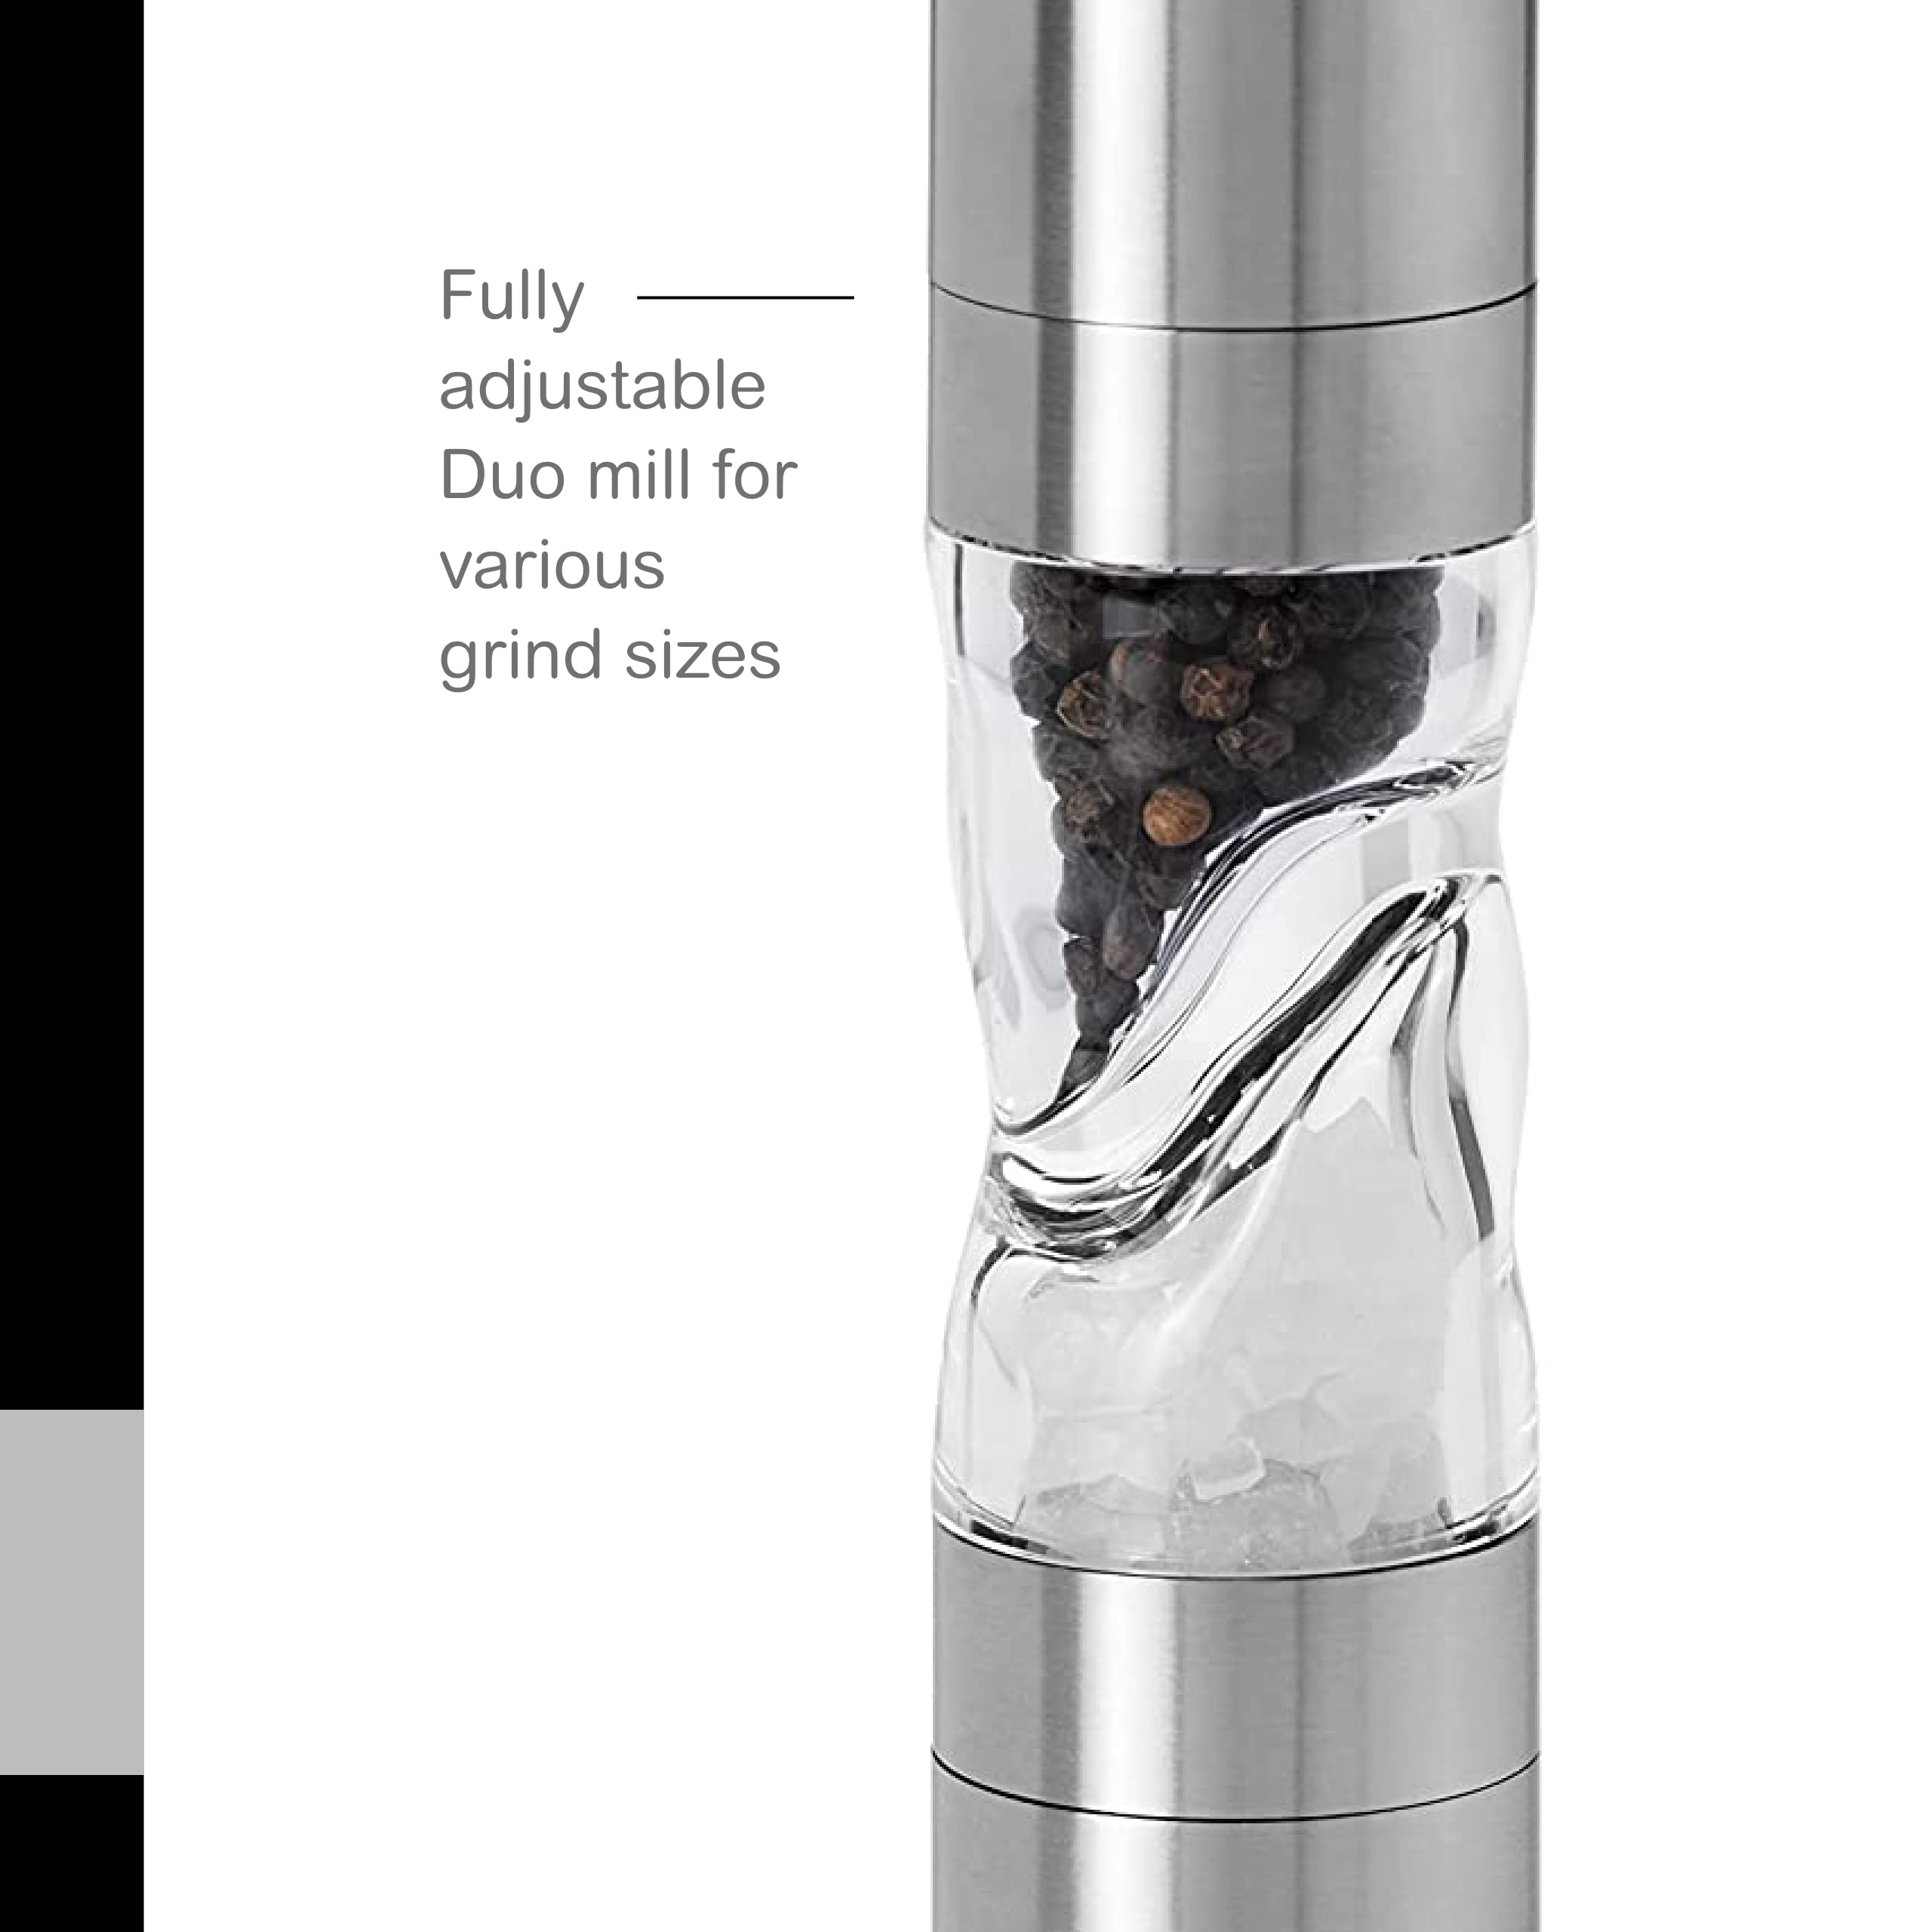 AdHoc Duomill Pure Salt and Pepper Combo Mill - 2-in-1 Salt and Pepper Grinder with Aroma Bottom Cap - Adjustable Grinder - Refillable Spice Tools - Hand Wash Kitchen Tool - Stainless Steel, 9"